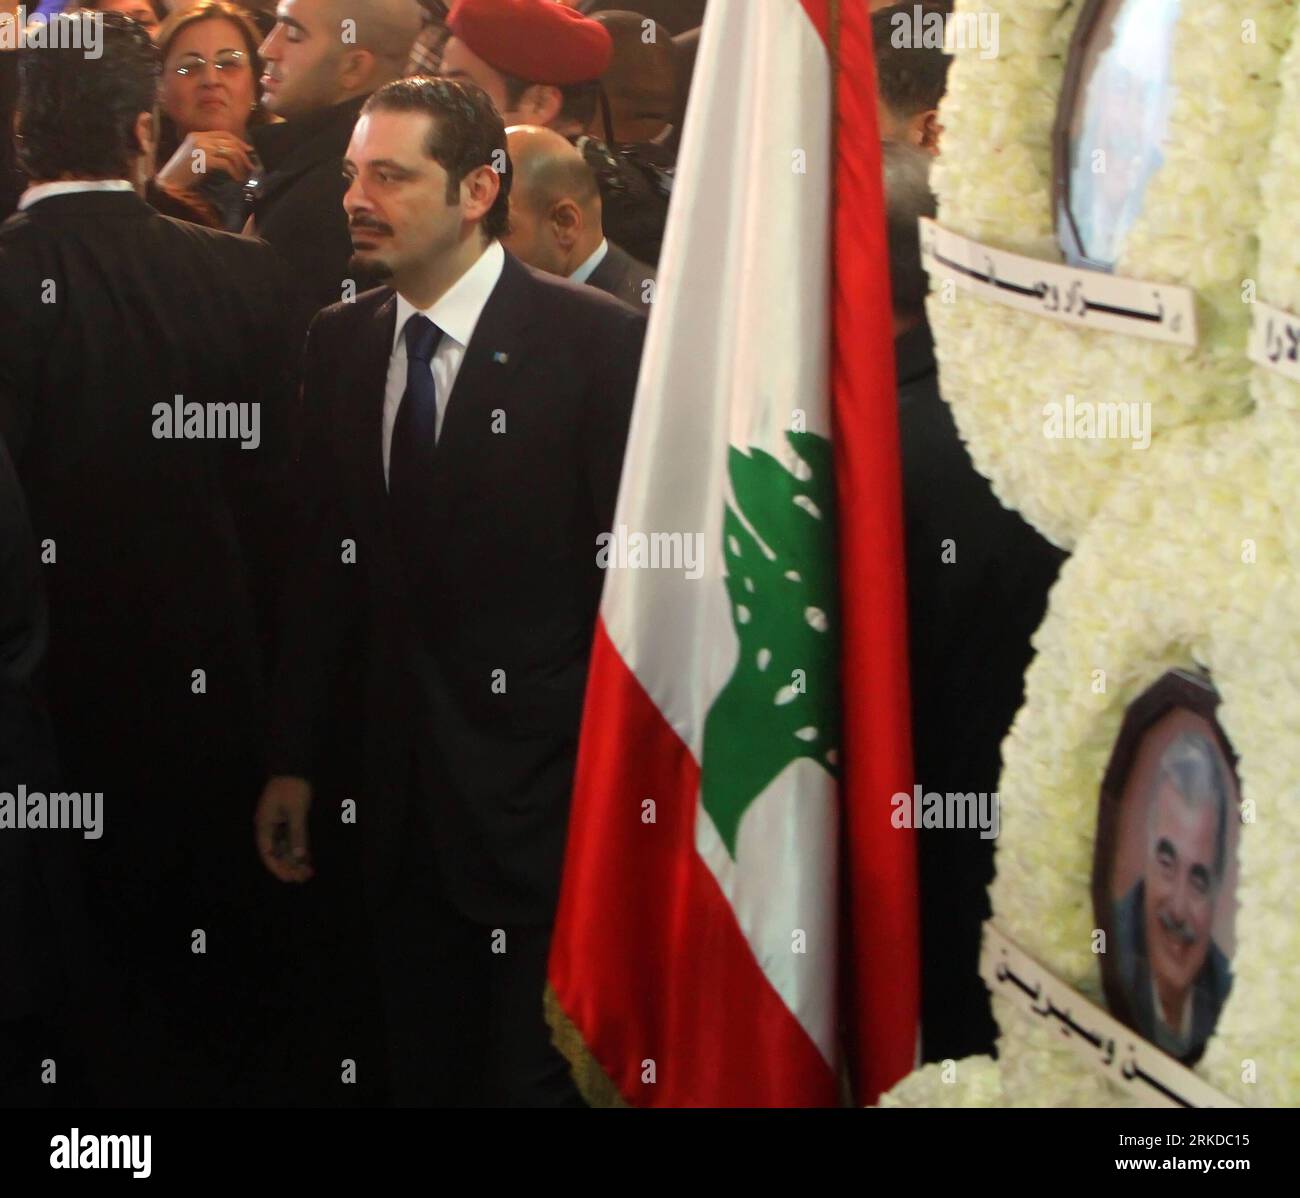 Bildnummer: 54908990  Datum: 14.02.2011  Copyright: imago/Xinhua (110214) -- BEIRUT, Feb. 14, 2011 (Xinhua) -- Lebanese caretaker Prime Minister Saad Hariri (Front), along with other officials, pray as they pay respects at the grave of Saad Hariri s father, former Prime Minister Rafiq Hariri, during a ceremony marking the sixth anniversary of his death at Martyrs square in downtown Beirut, capital of Lebanon, Feb. 14, 2011. On Feb. 14, 2005, Hariri was killed along with 22 others in a bomb attack in Beirut. (Xinhua/Koka) (wjd) LEBANON-BEIRUT-RAFIQ HARIRI-ANNIVERSARY PUBLICATIONxNOTxINxCHN Poli Stock Photo